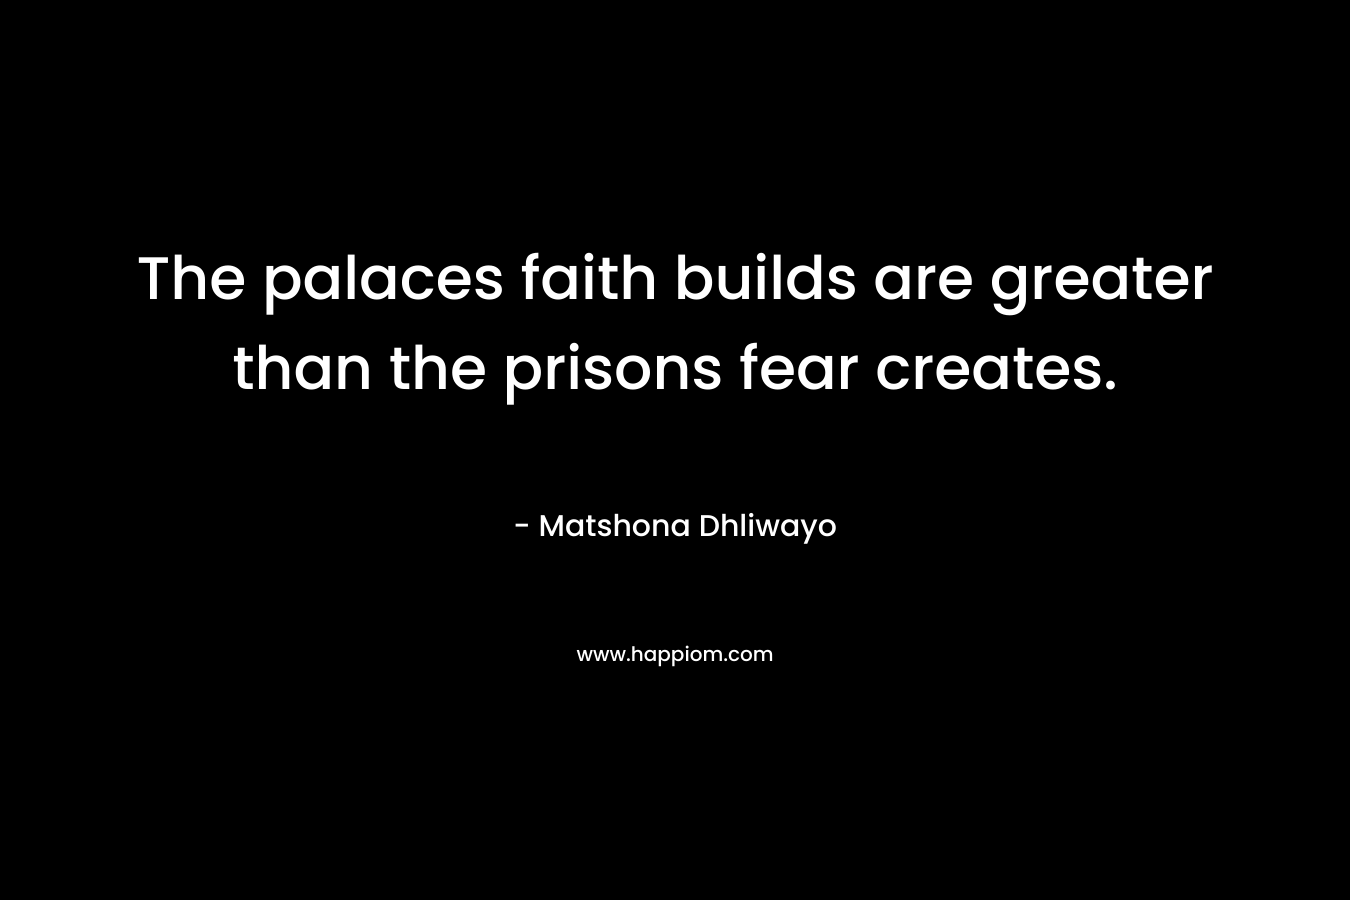 The palaces faith builds are greater than the prisons fear creates. – Matshona Dhliwayo